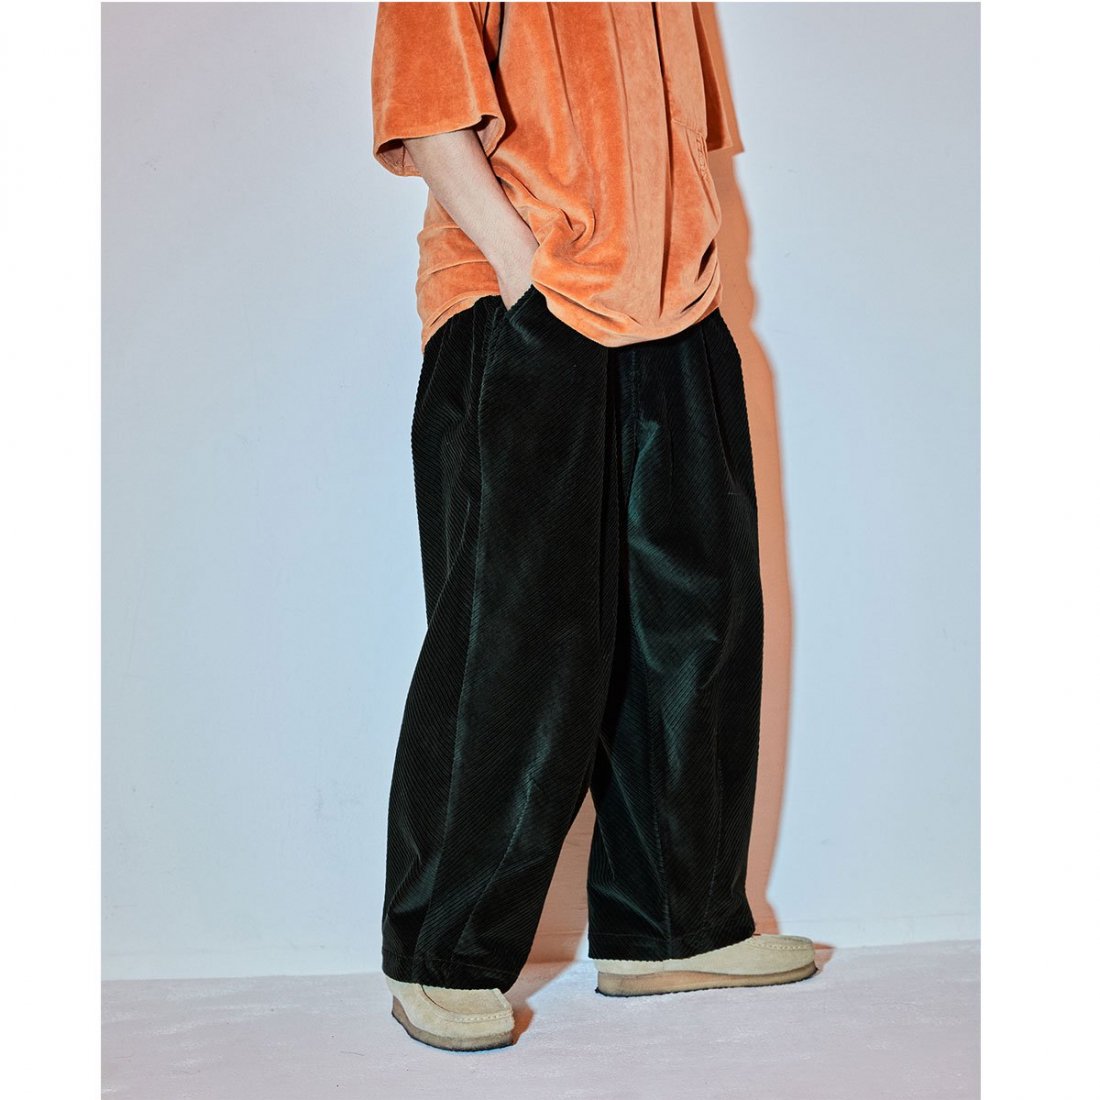 High Waisted Cargo Pants Women Baggy Jeans with Pockets Girls Casual Wide  Leg Work Pants